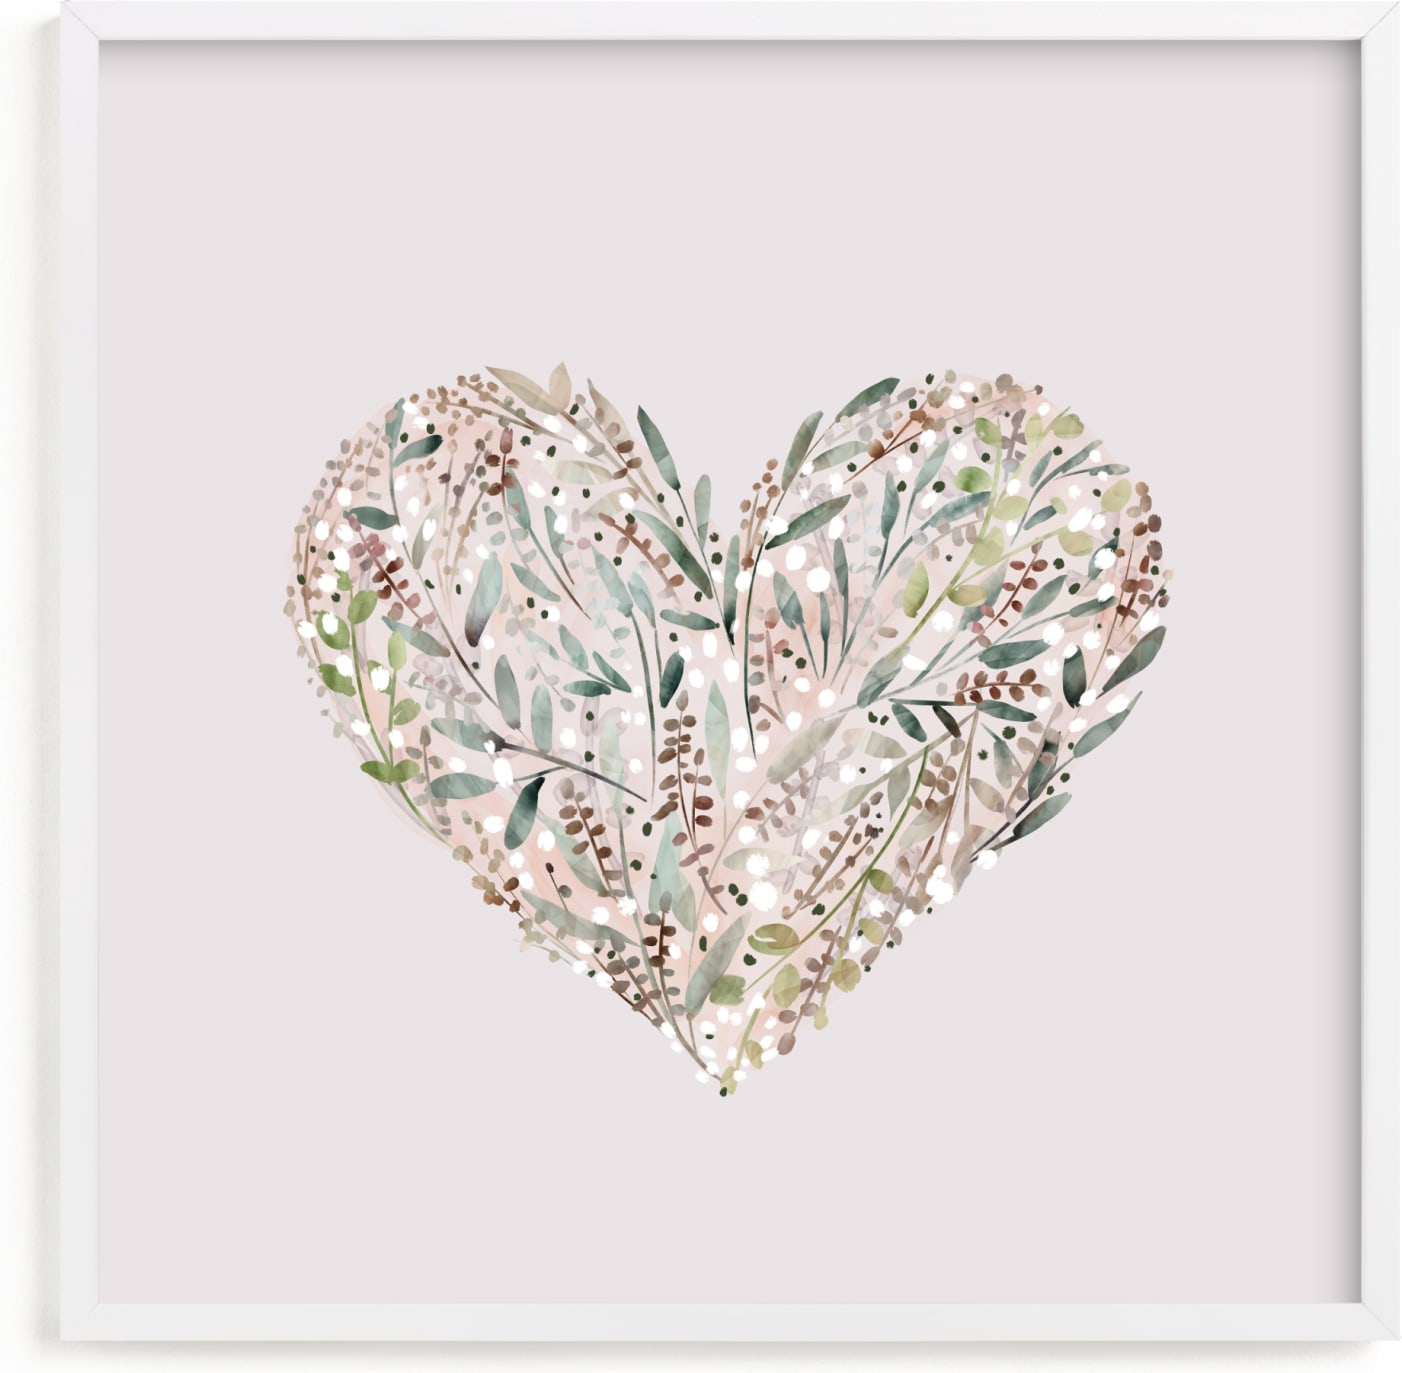 This is a pink kids wall art by Petra Kern called Burstin Heart.